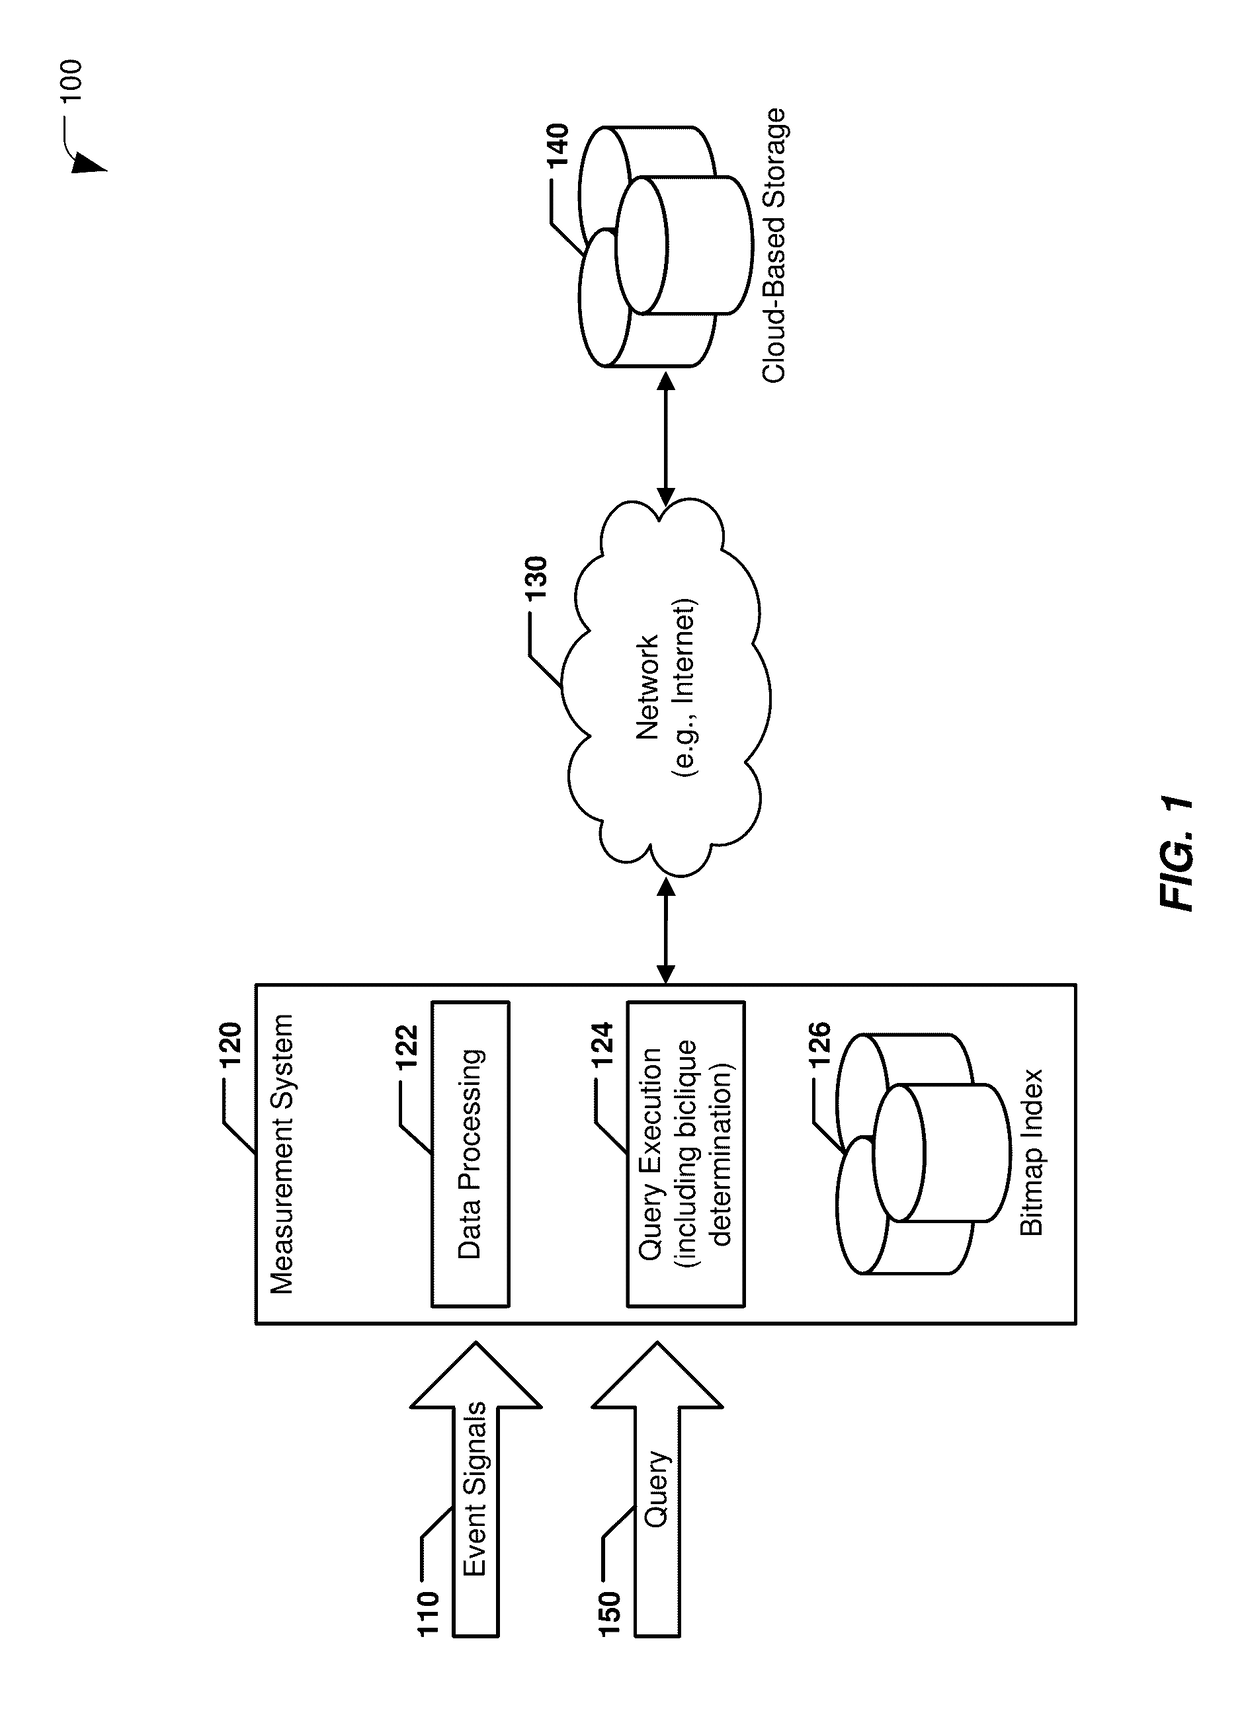 Systems and methods of using a bitmap index to determine bicliques